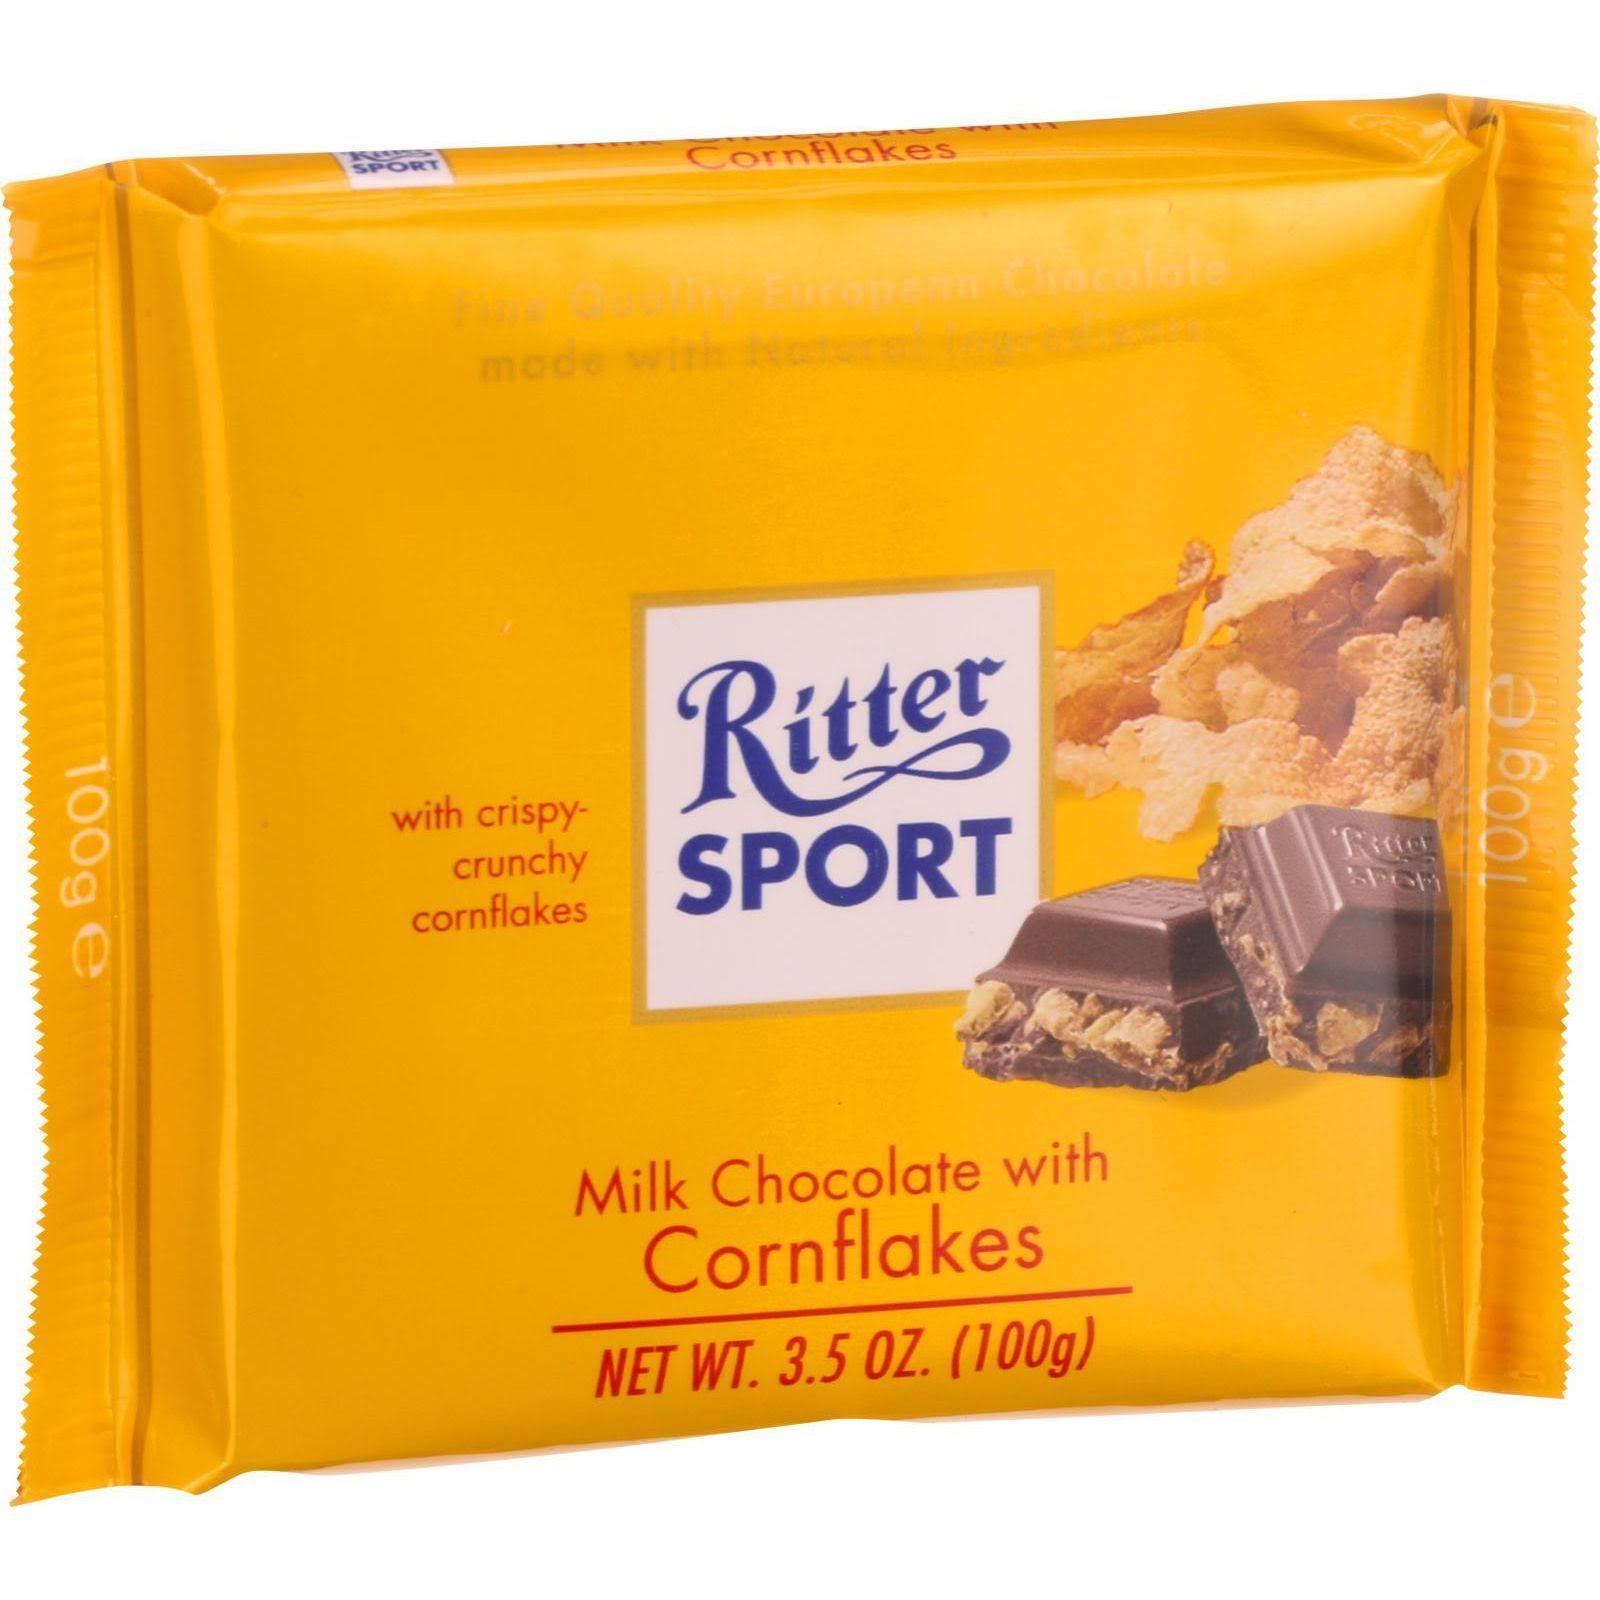 Ritter Sport Milk Chocolate With Cornflakes - 3.5 oz